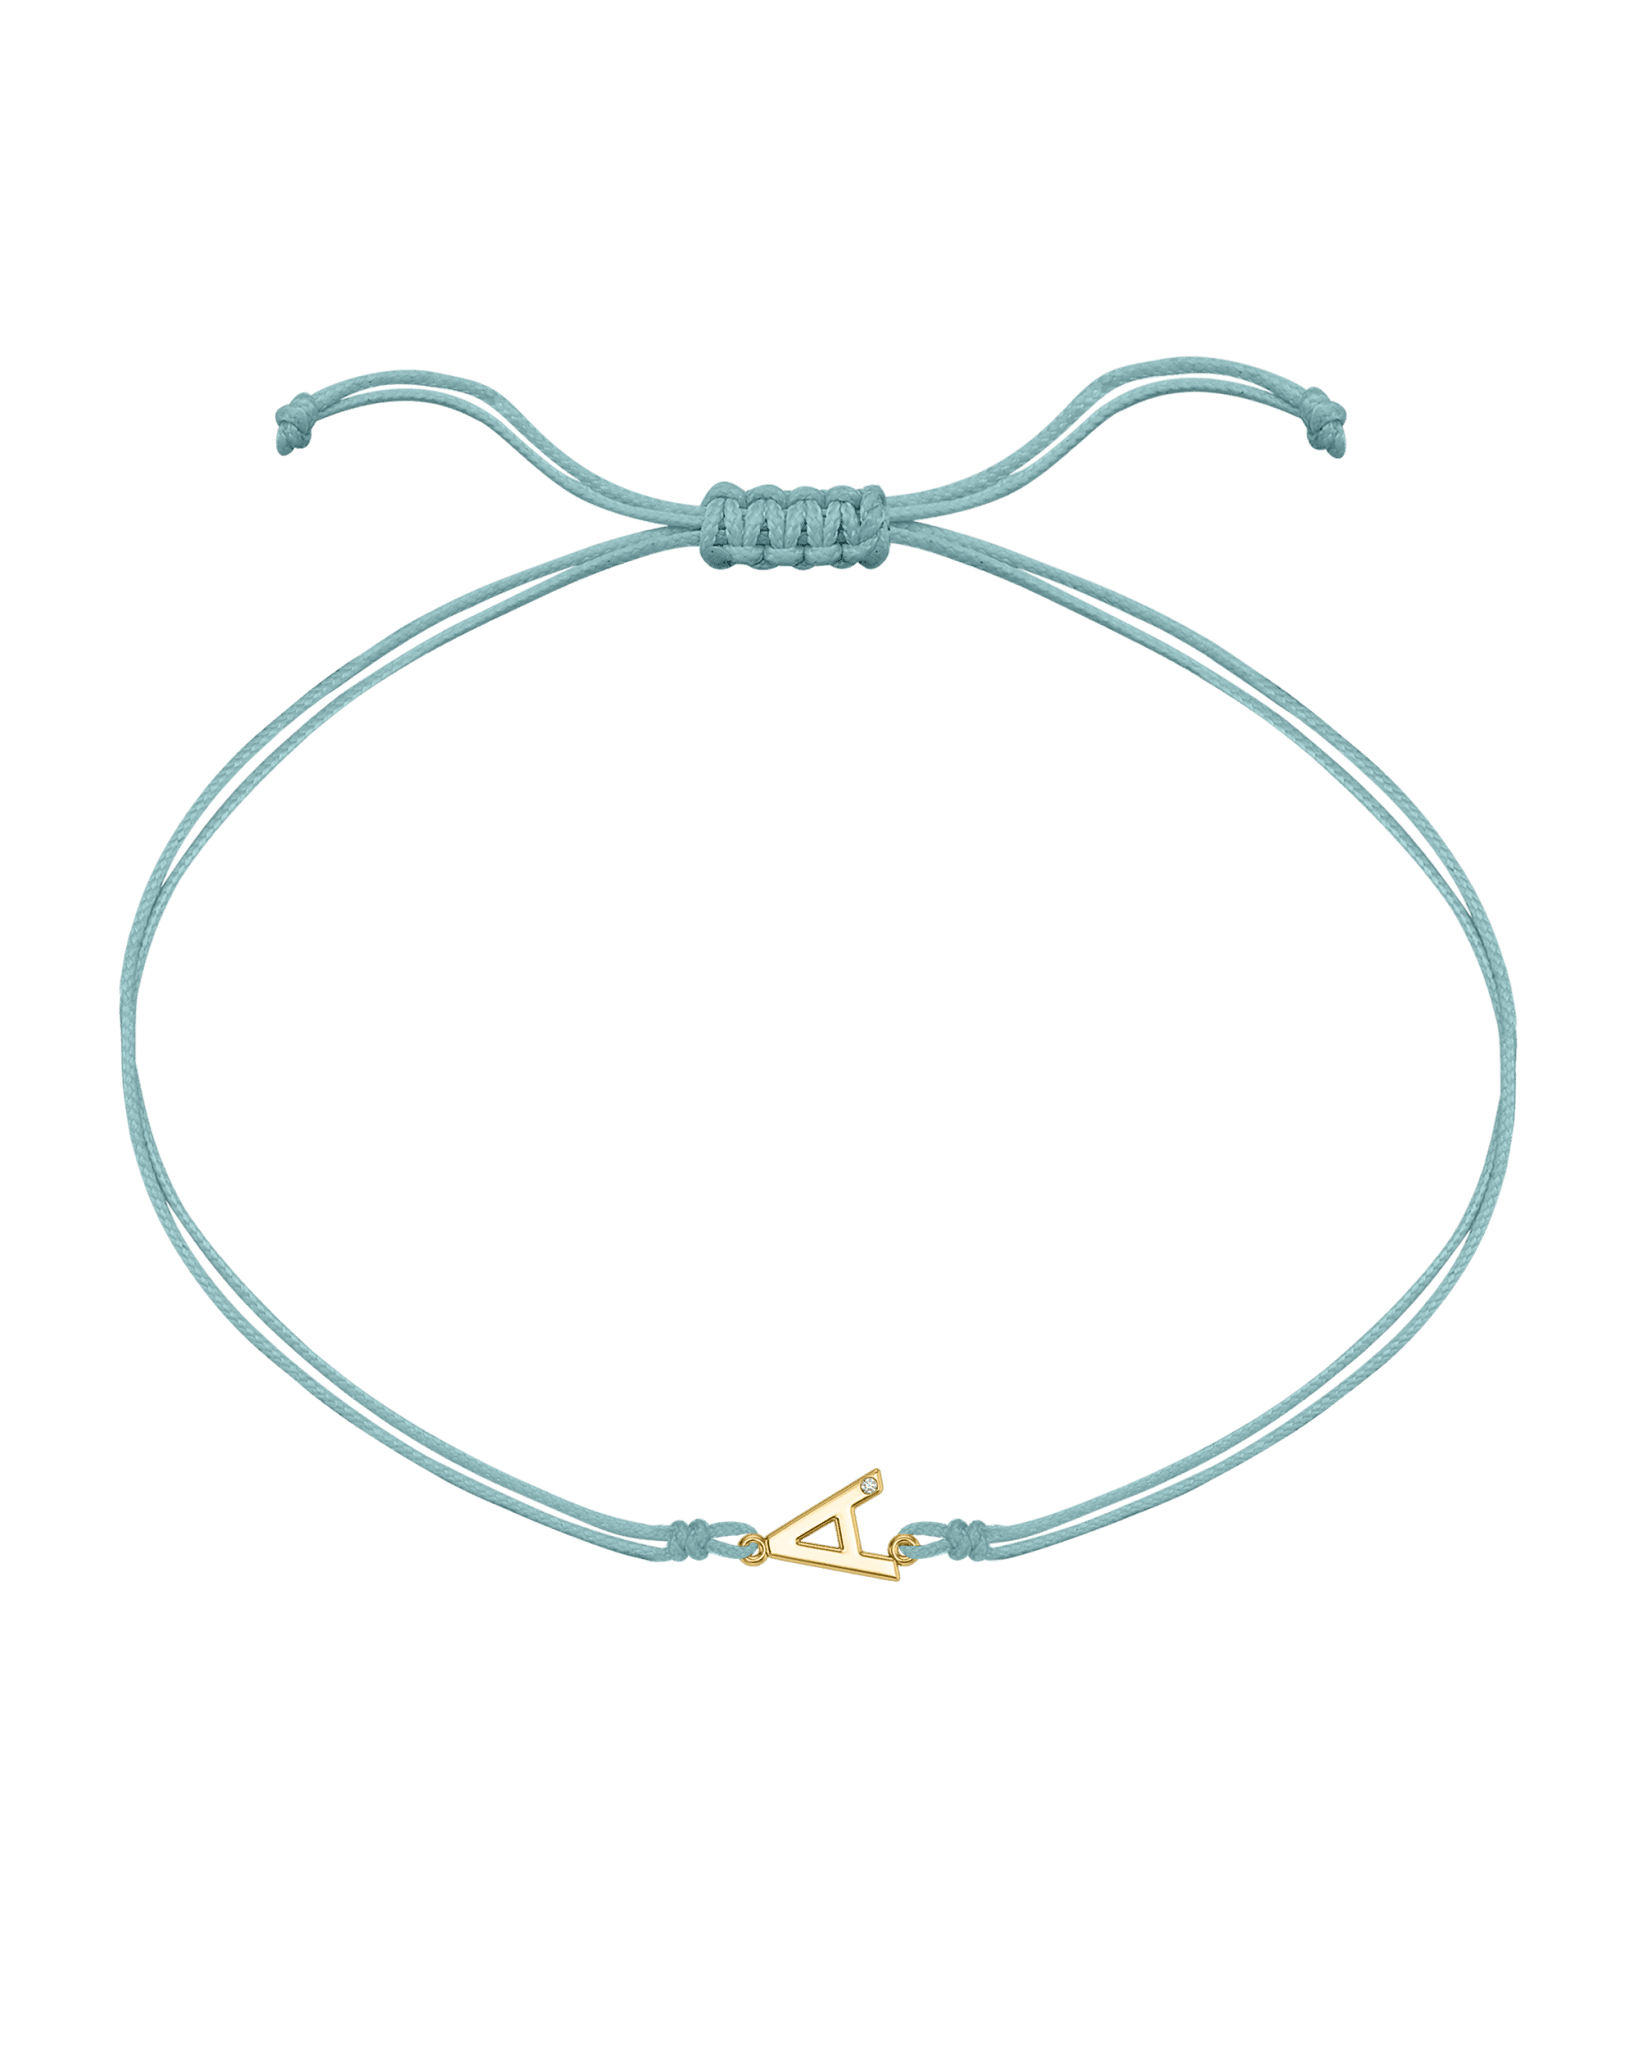 Initial String of Love - 14K Yellow Gold Bracelets 14K Solid Gold Turquoise 